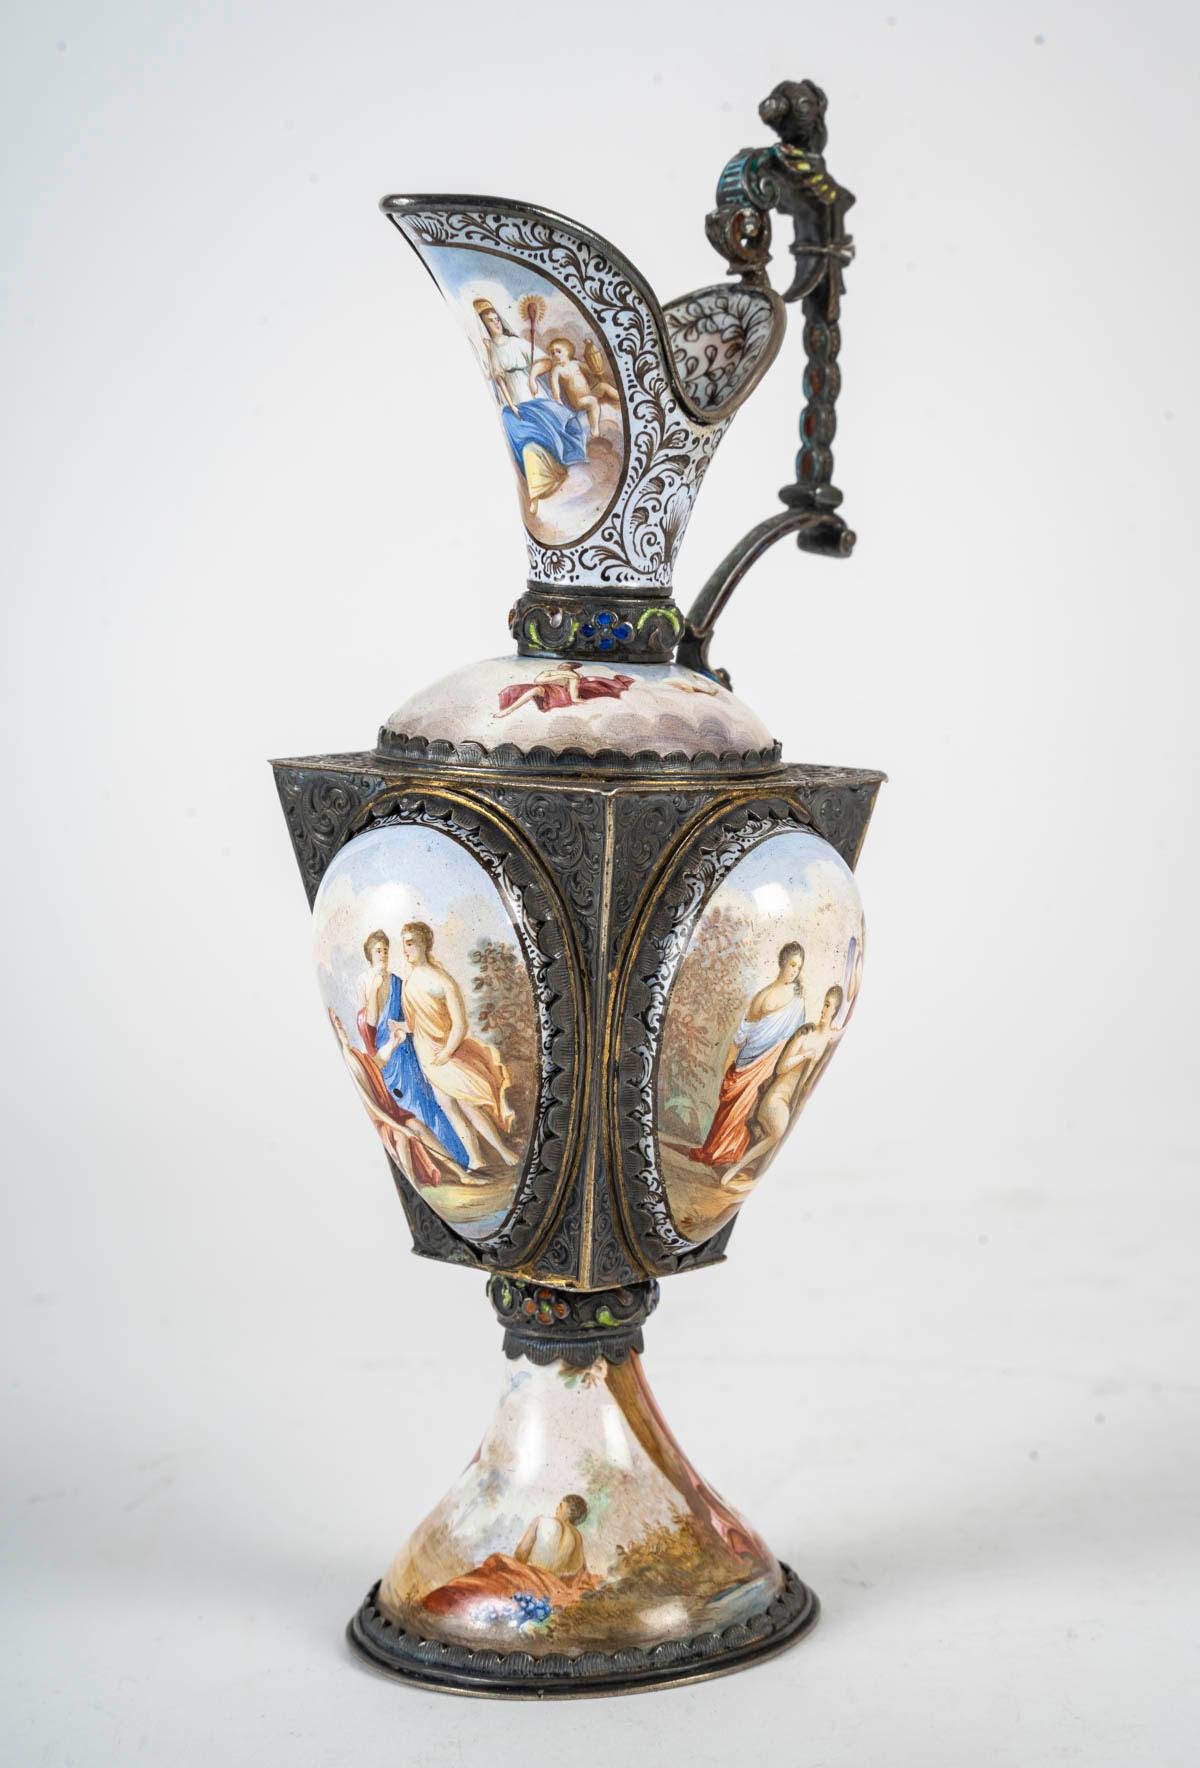 Enamelled silver ewer, 19th century, Napoleon III period.

A Napoleon III period silver ewer, 19th century, decorated with enamel paintings of antique scenes.
h: 18cm, w: 8.5cm, d: 7.5cm